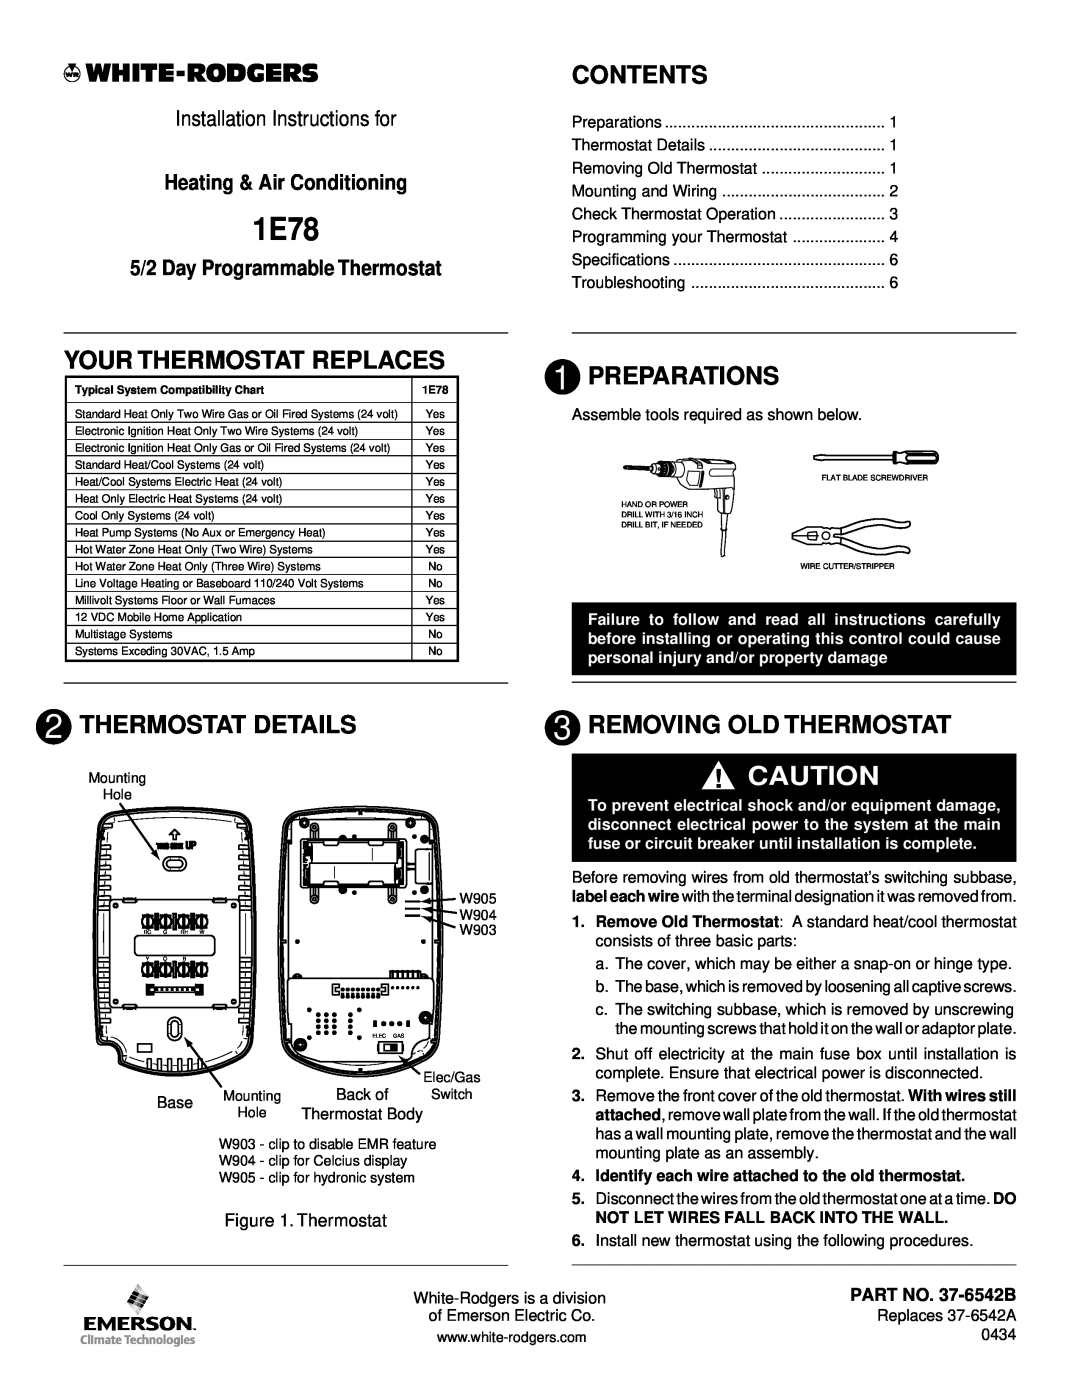 White Rodgers 1.00E+78 installation instructions Your Thermostat Replaces, Contents, Preparations, Thermostat Details 